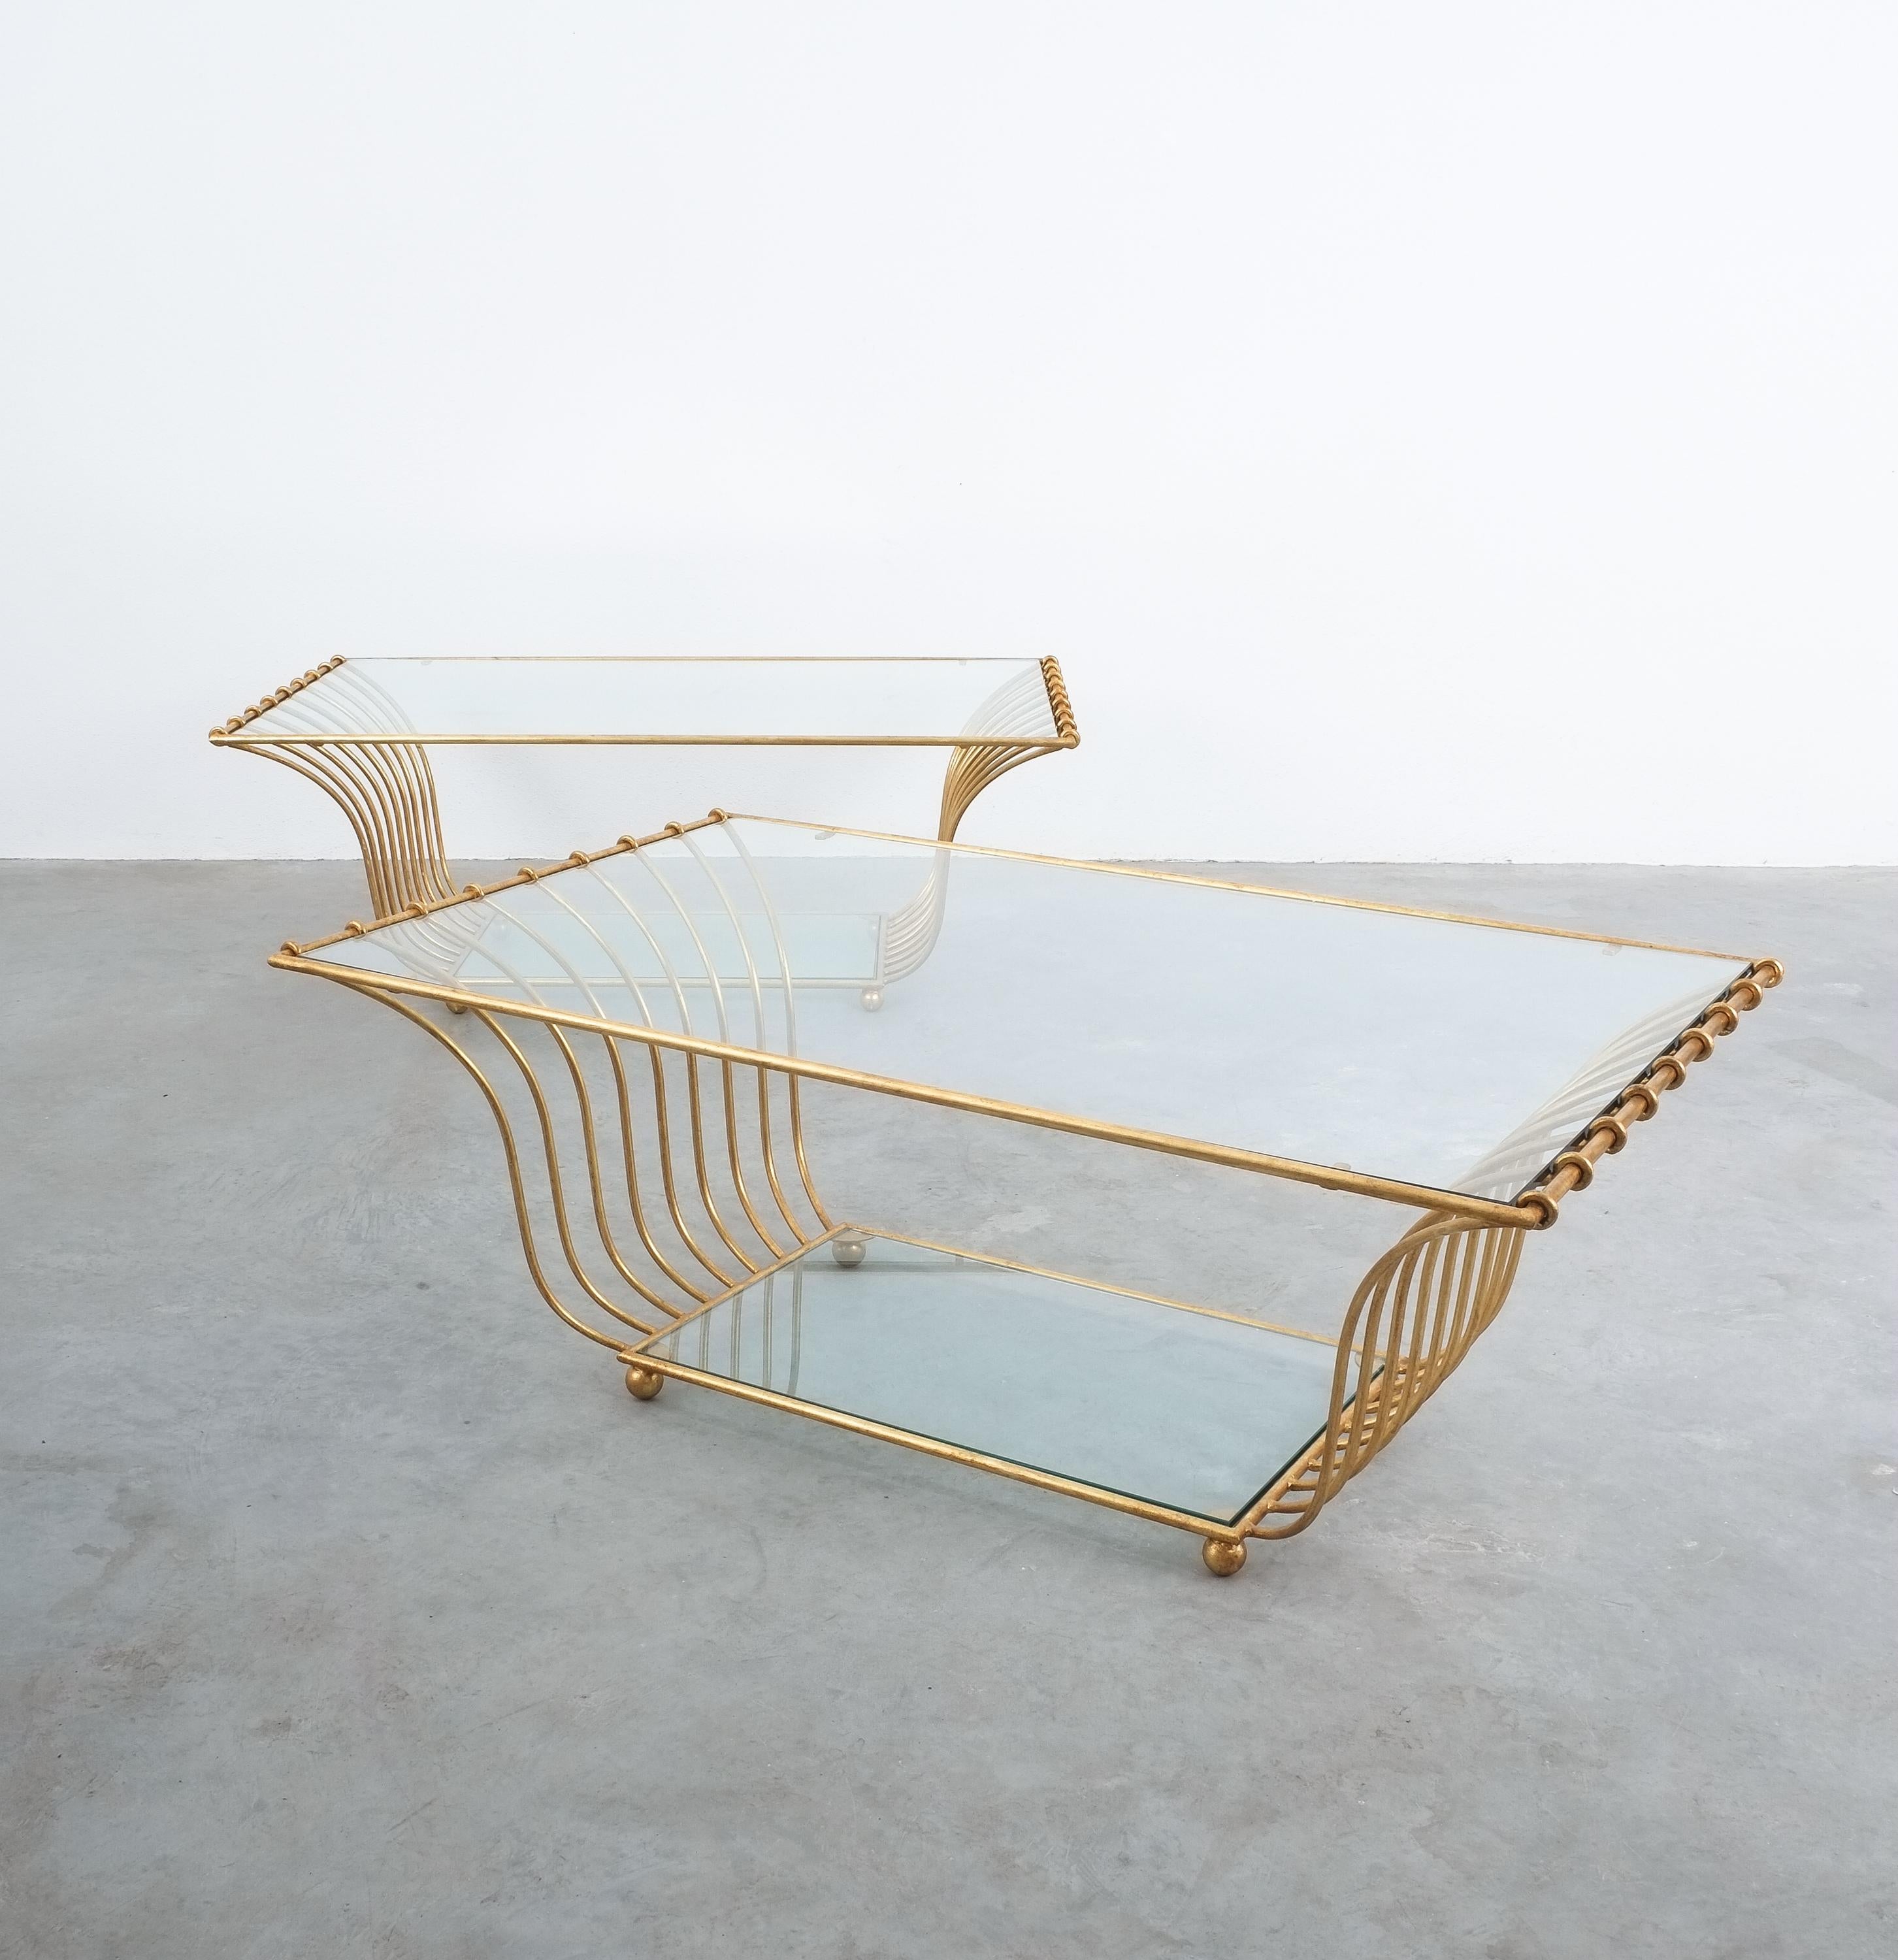 One of two large golden harp coffee tables, France, circa 1955

Sold and priced per piece, individually; Measurements are 50